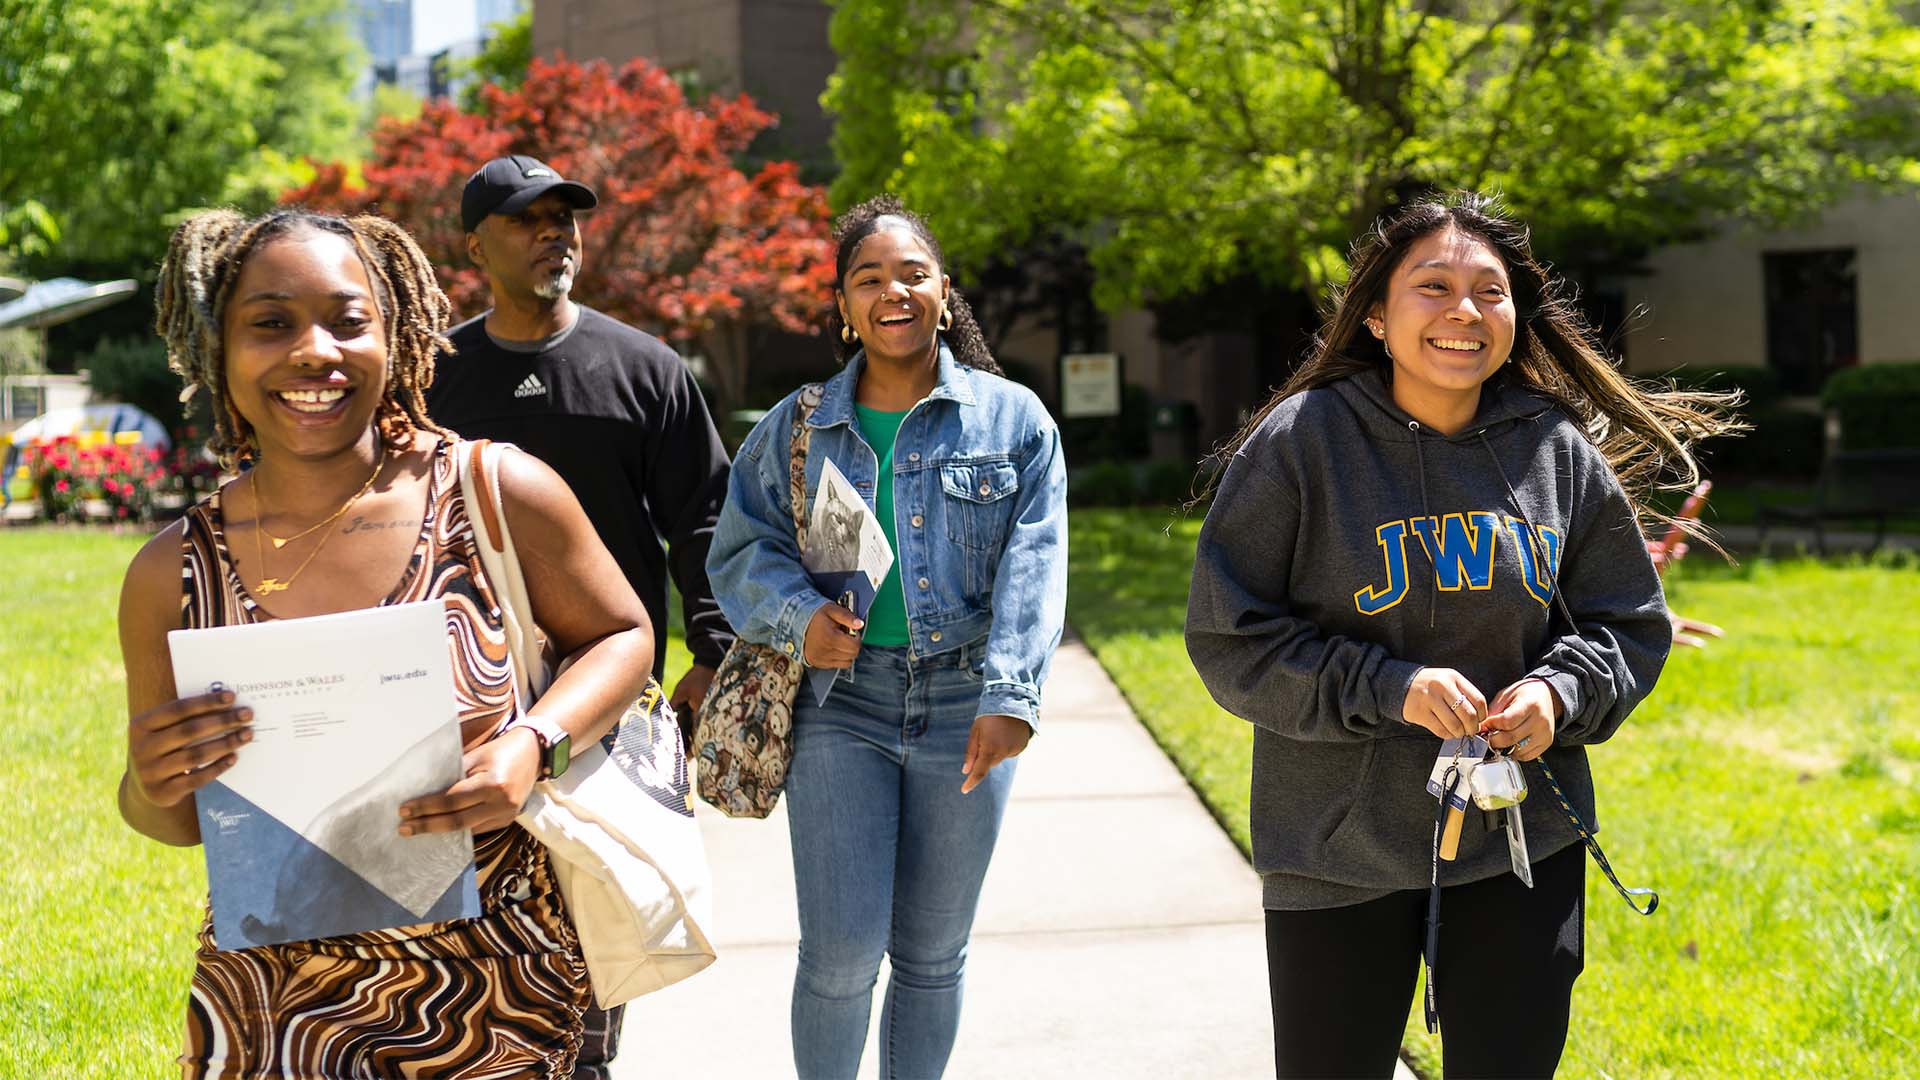 Johnson & Wales University makes accessibility and inclusion a priority